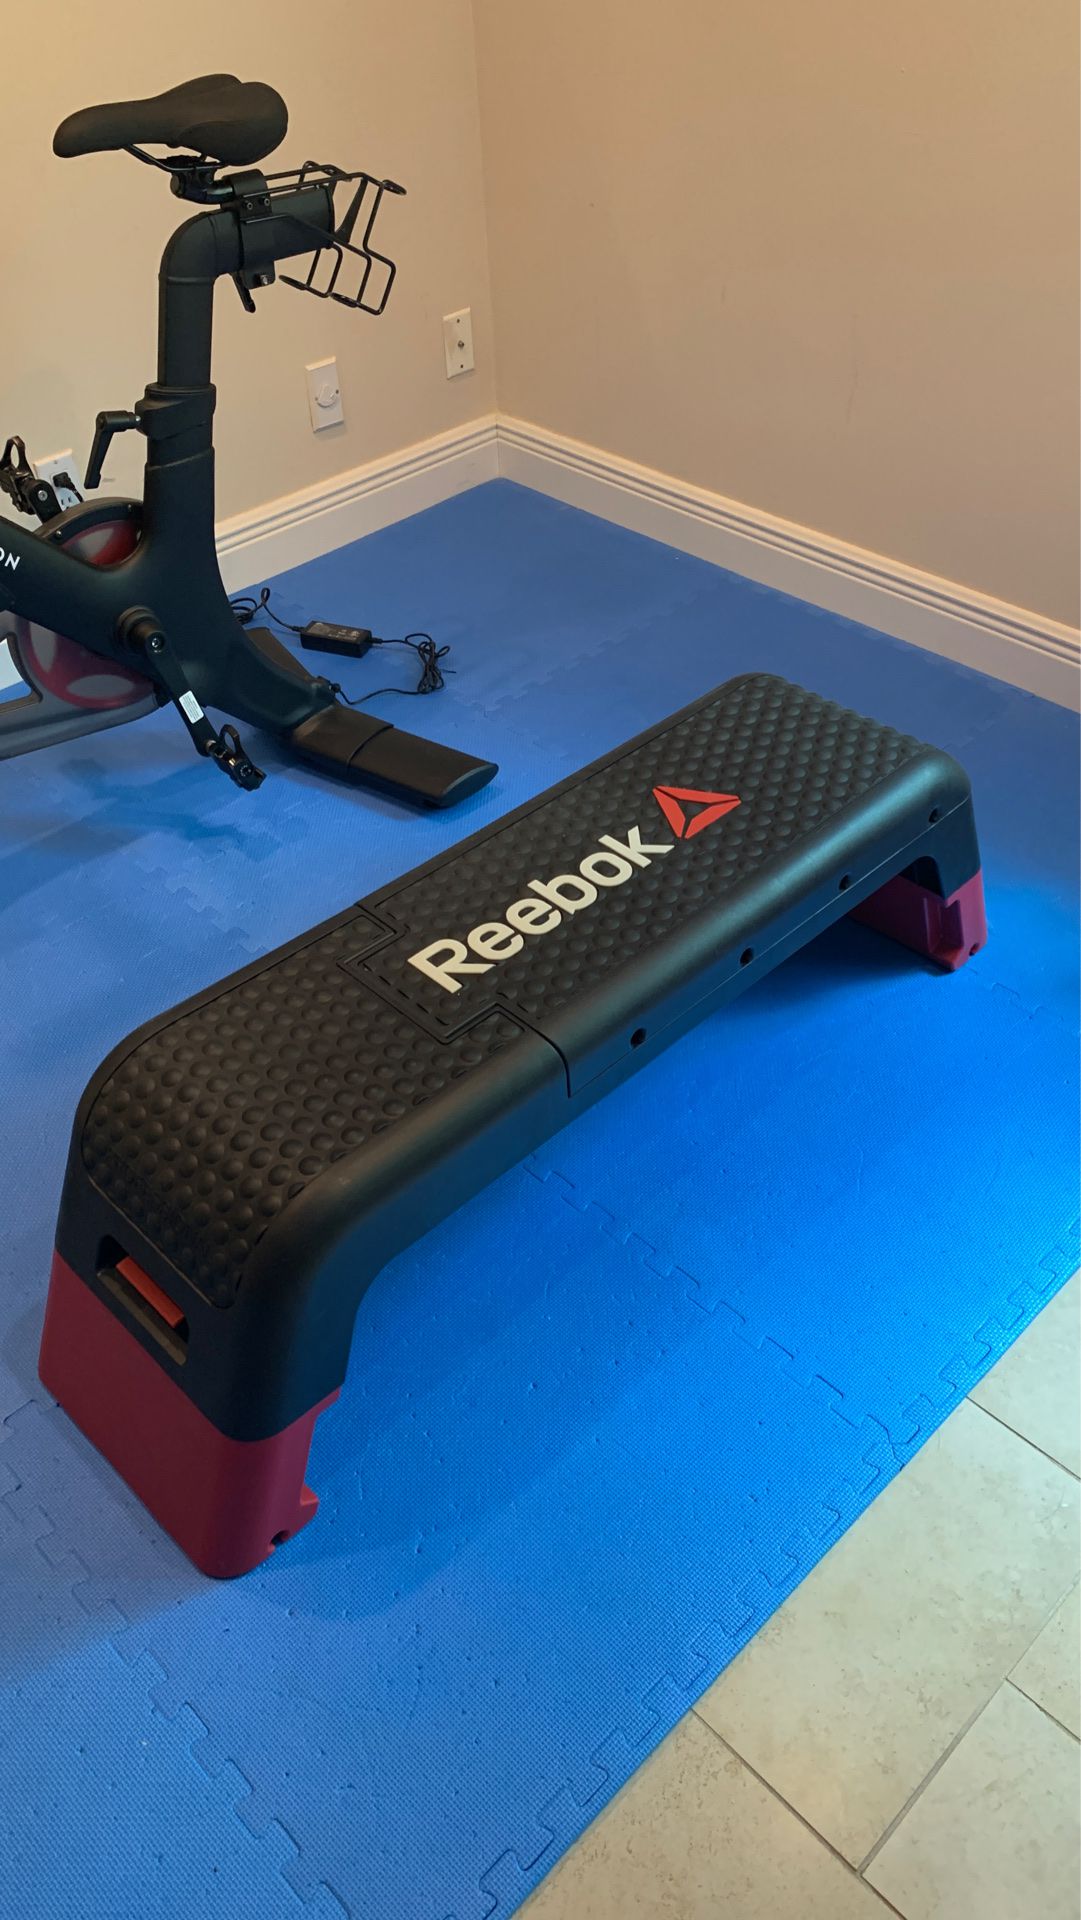 Reebok professional fitness deck weightlifting bench